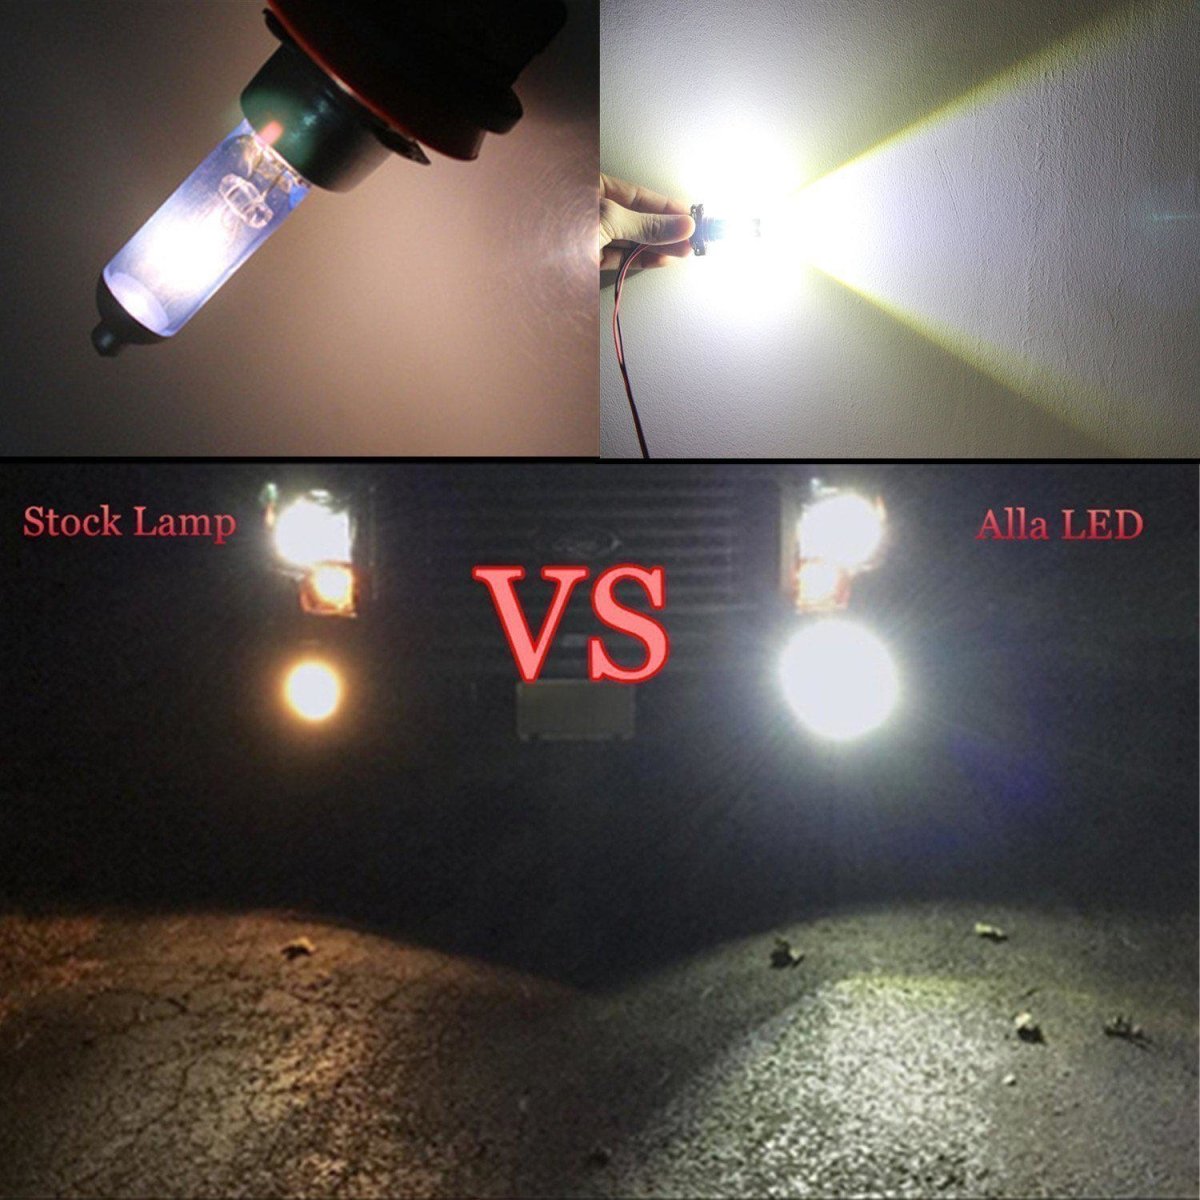 881 889 LED Bulbs 50W Cree Fog Lights Replacement for Cars, Trucks 898 -Alla Lighting